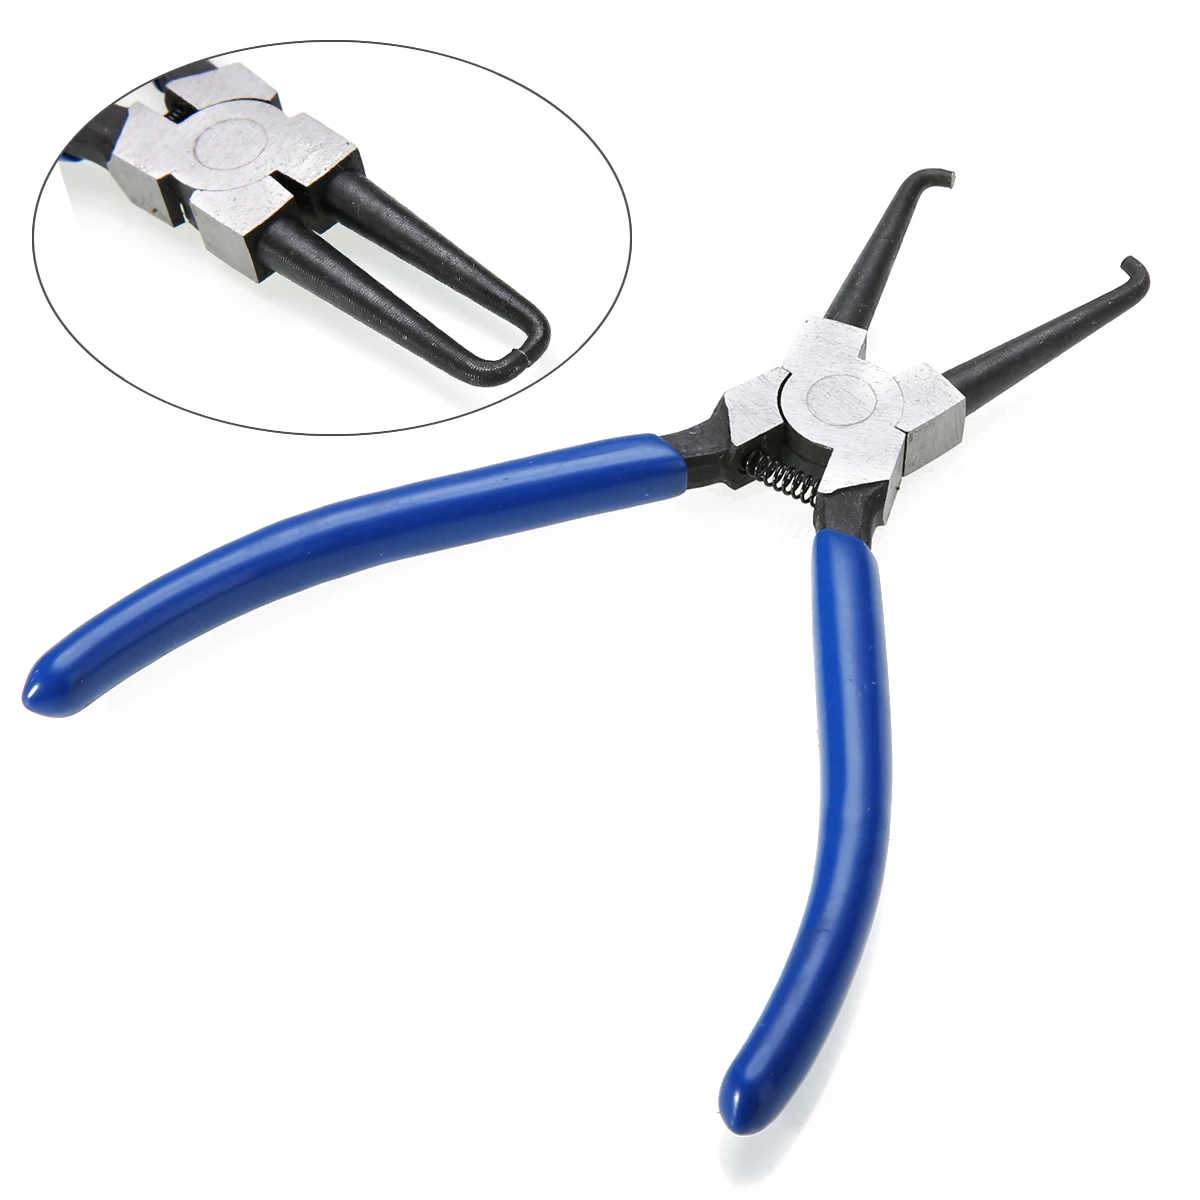 1pc Joint Plier Mayitr Fuel Hose Pipe Filters Buckle Removal Pliers Caliper 163*104.5mm For Car Auto Vehicle